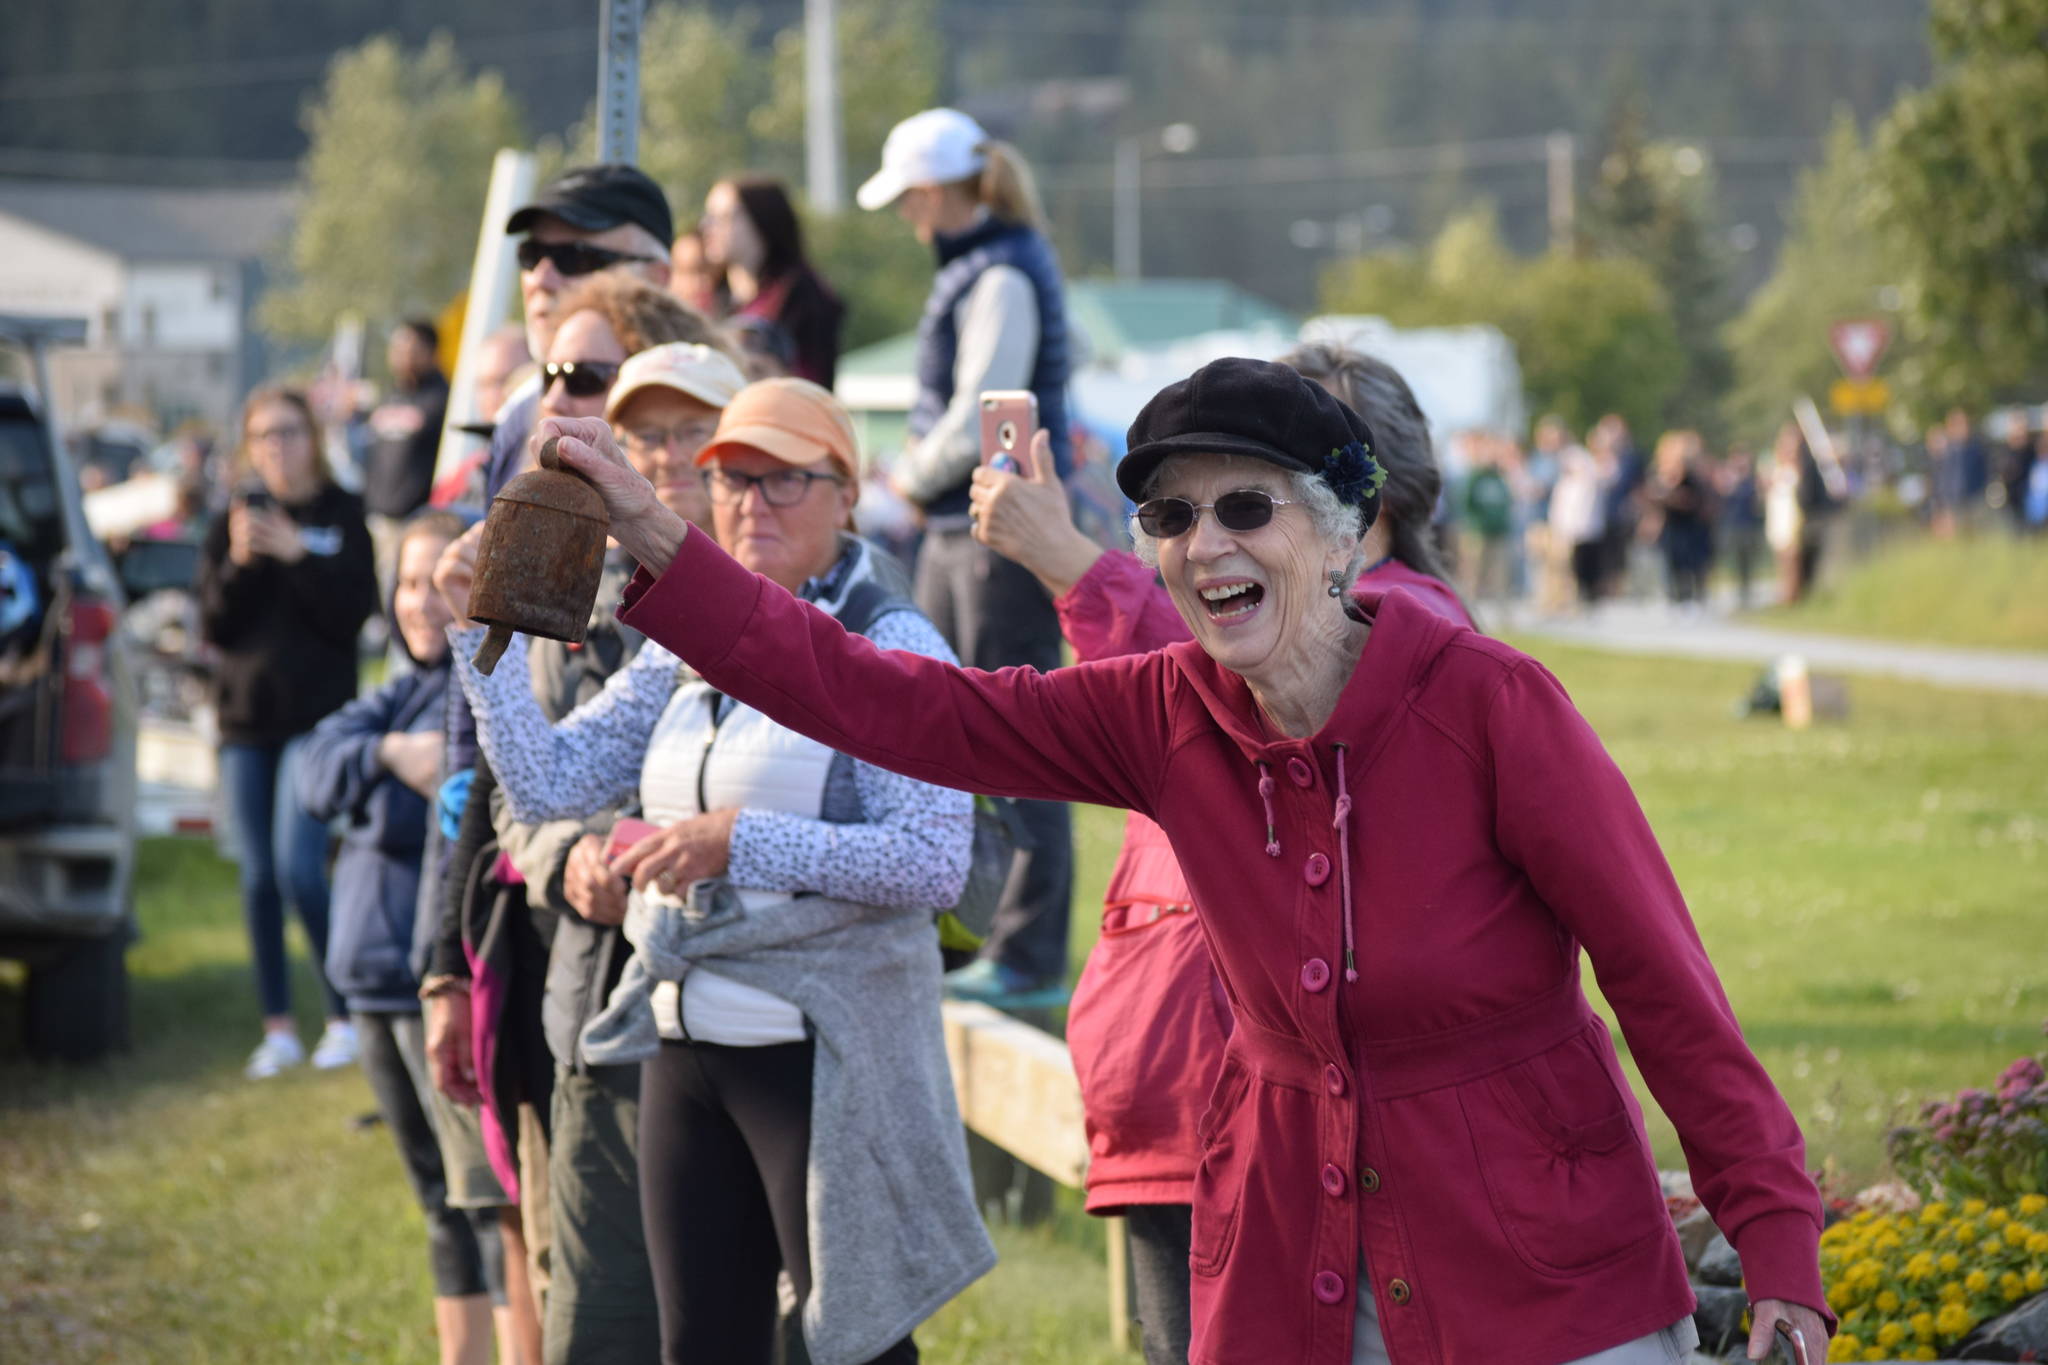 The crowd cheers as Olympic gold medalist Lydia Jacoby passes through Seward during her celebratory parade on Thursday, August 5, 2021. (Camille Botello / Peninsula Clarion)